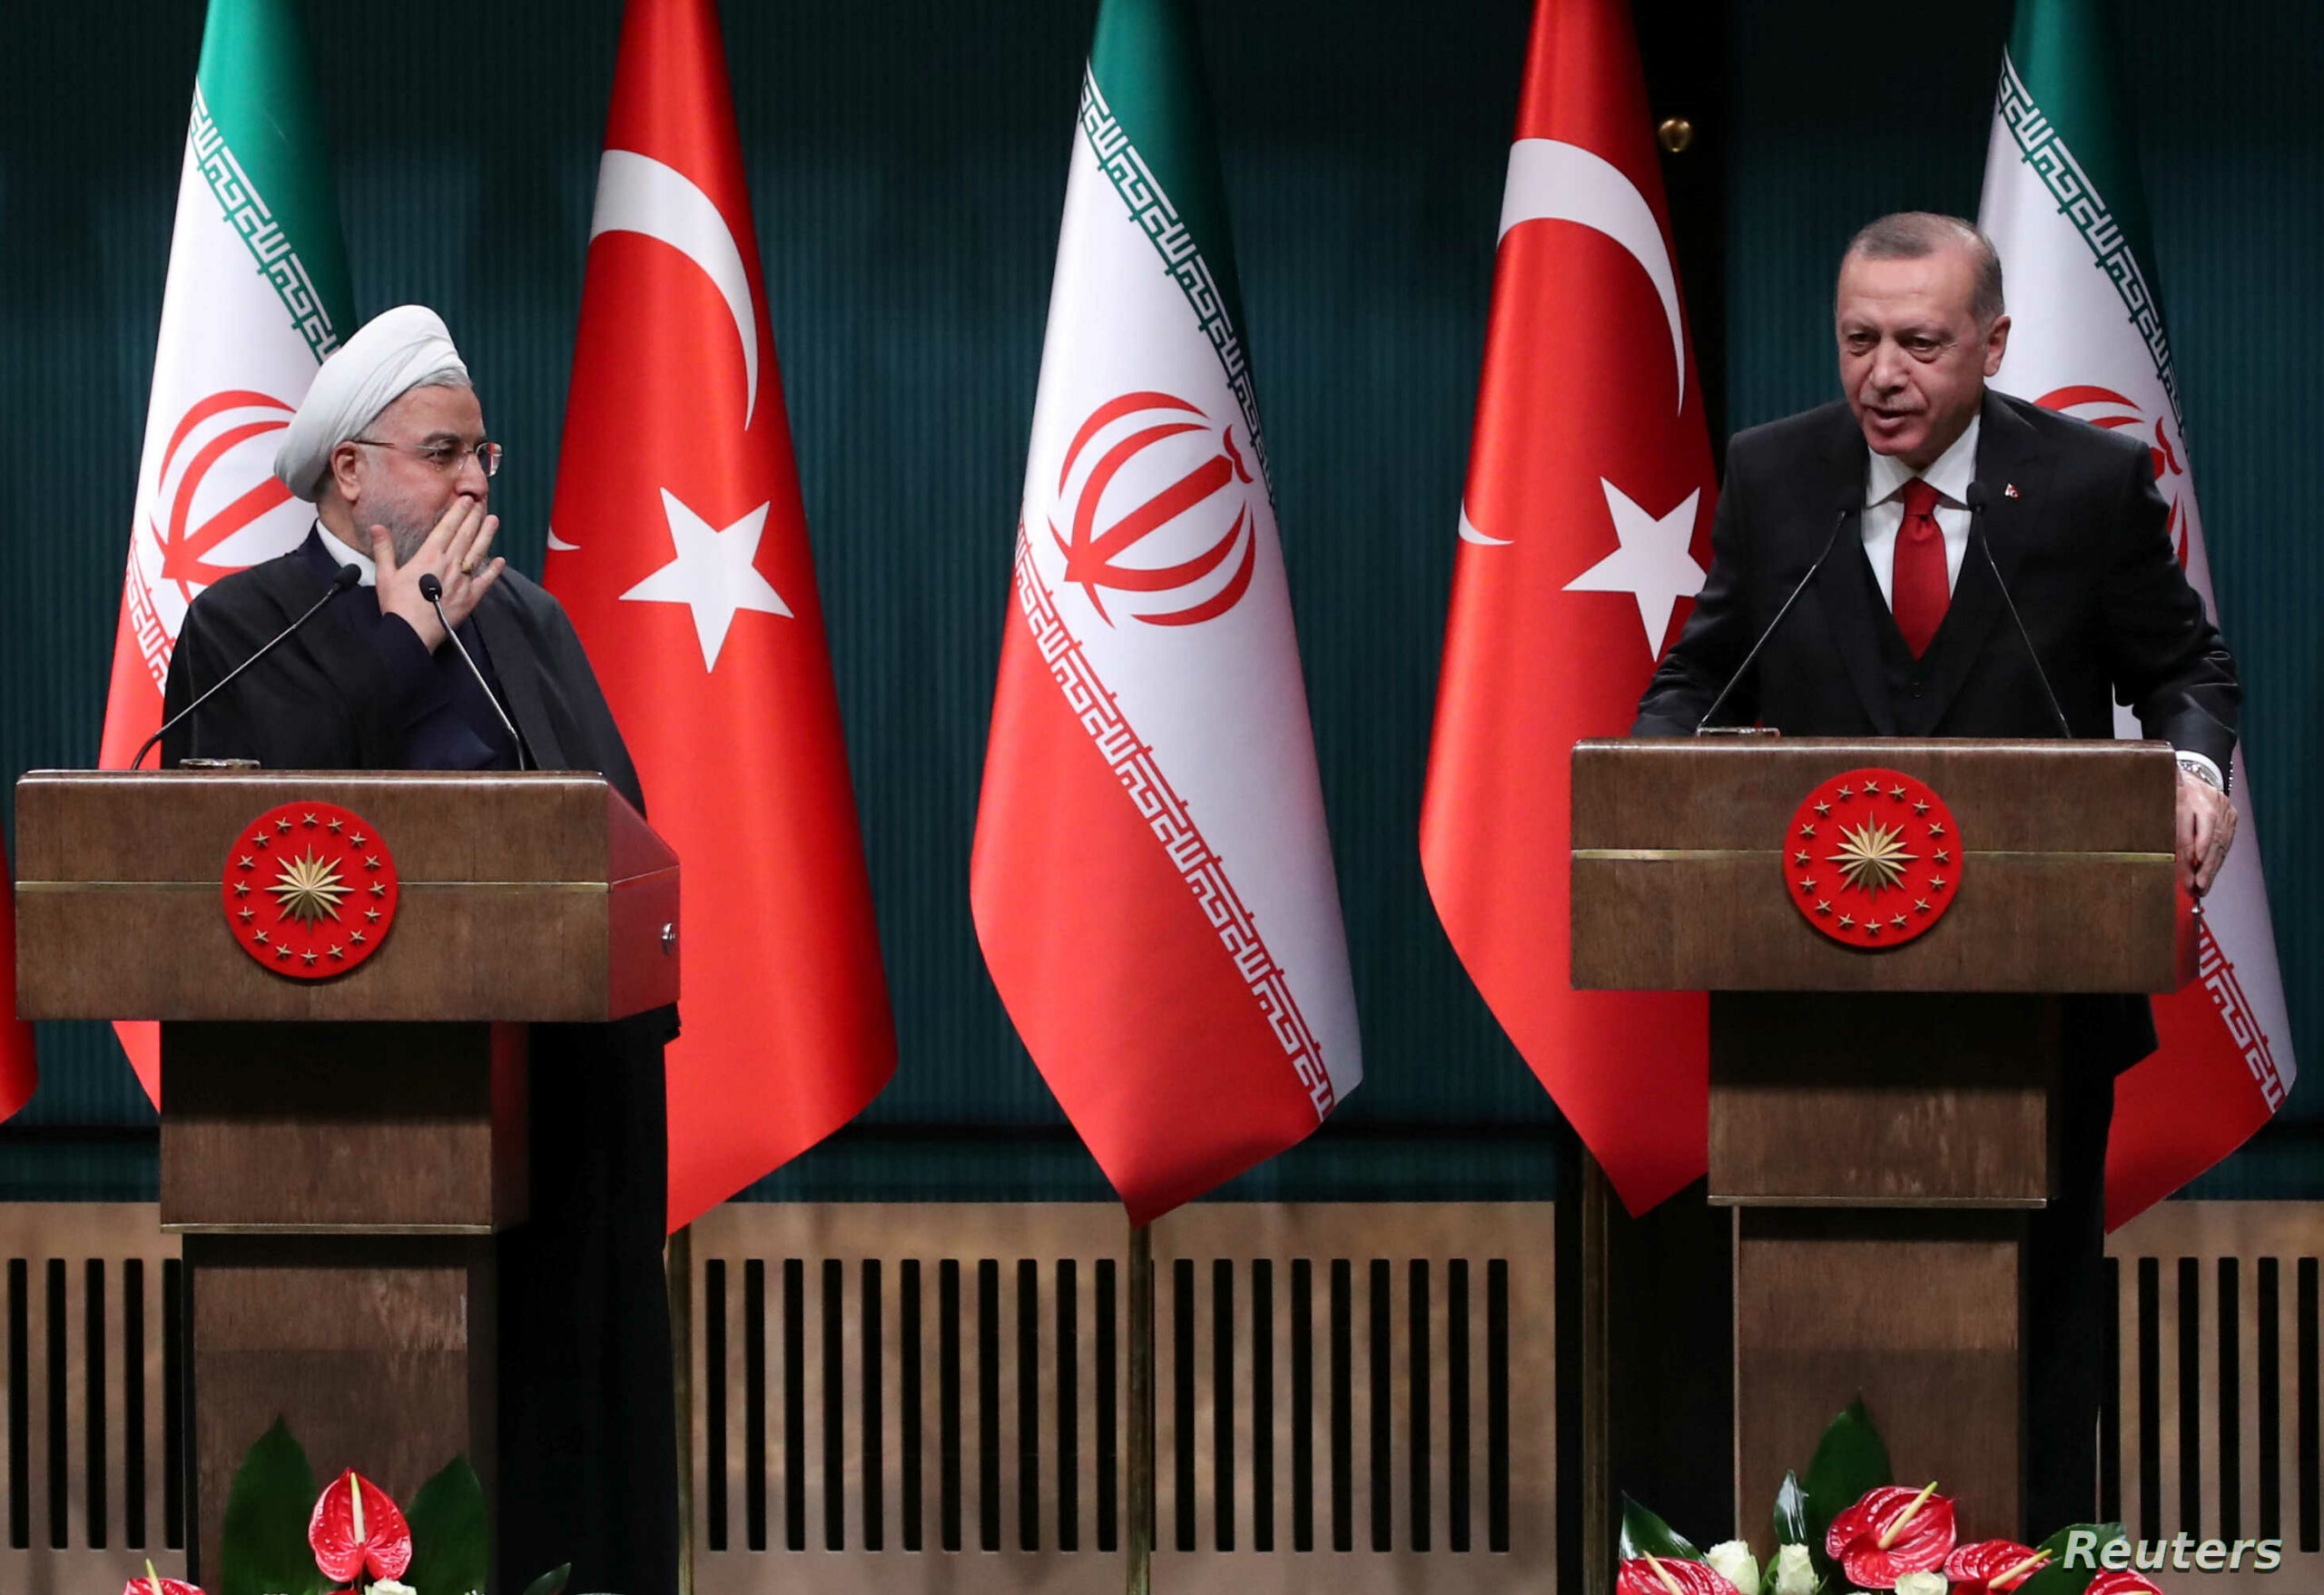 Turkish President Tayyip Erdogan and his Iranian counterpart Hassan Rouhani hold a joint news conference after their meeting in Ankara, Turkey, December 20, 2018. REUTERS/Umit Bektas - RC1D04743FA0